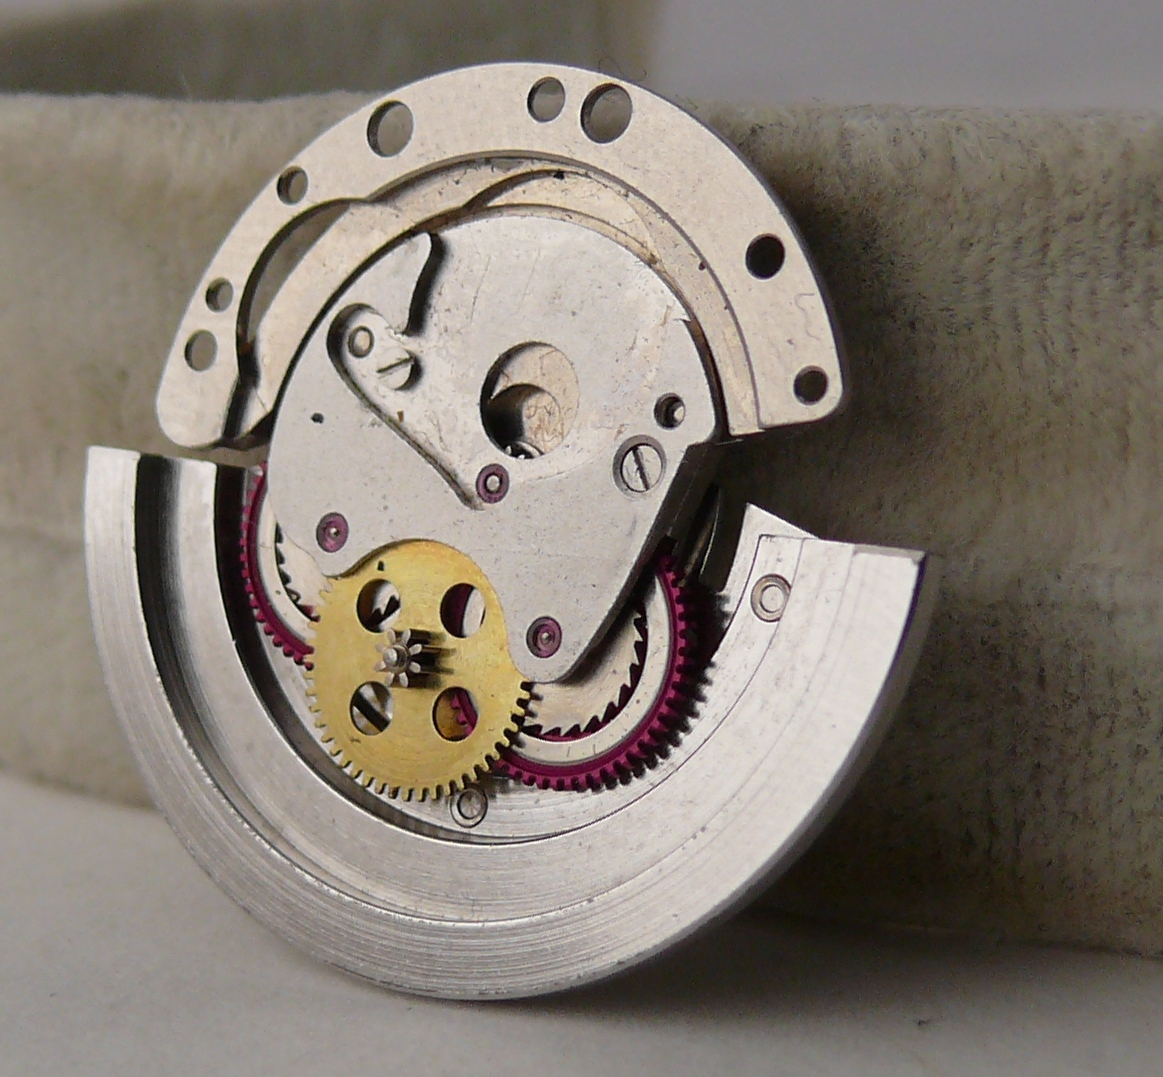 1970s Vintage Rolex 1520 Movement Automatic unit . Please note all parts are clean and genuine, - Image 7 of 9